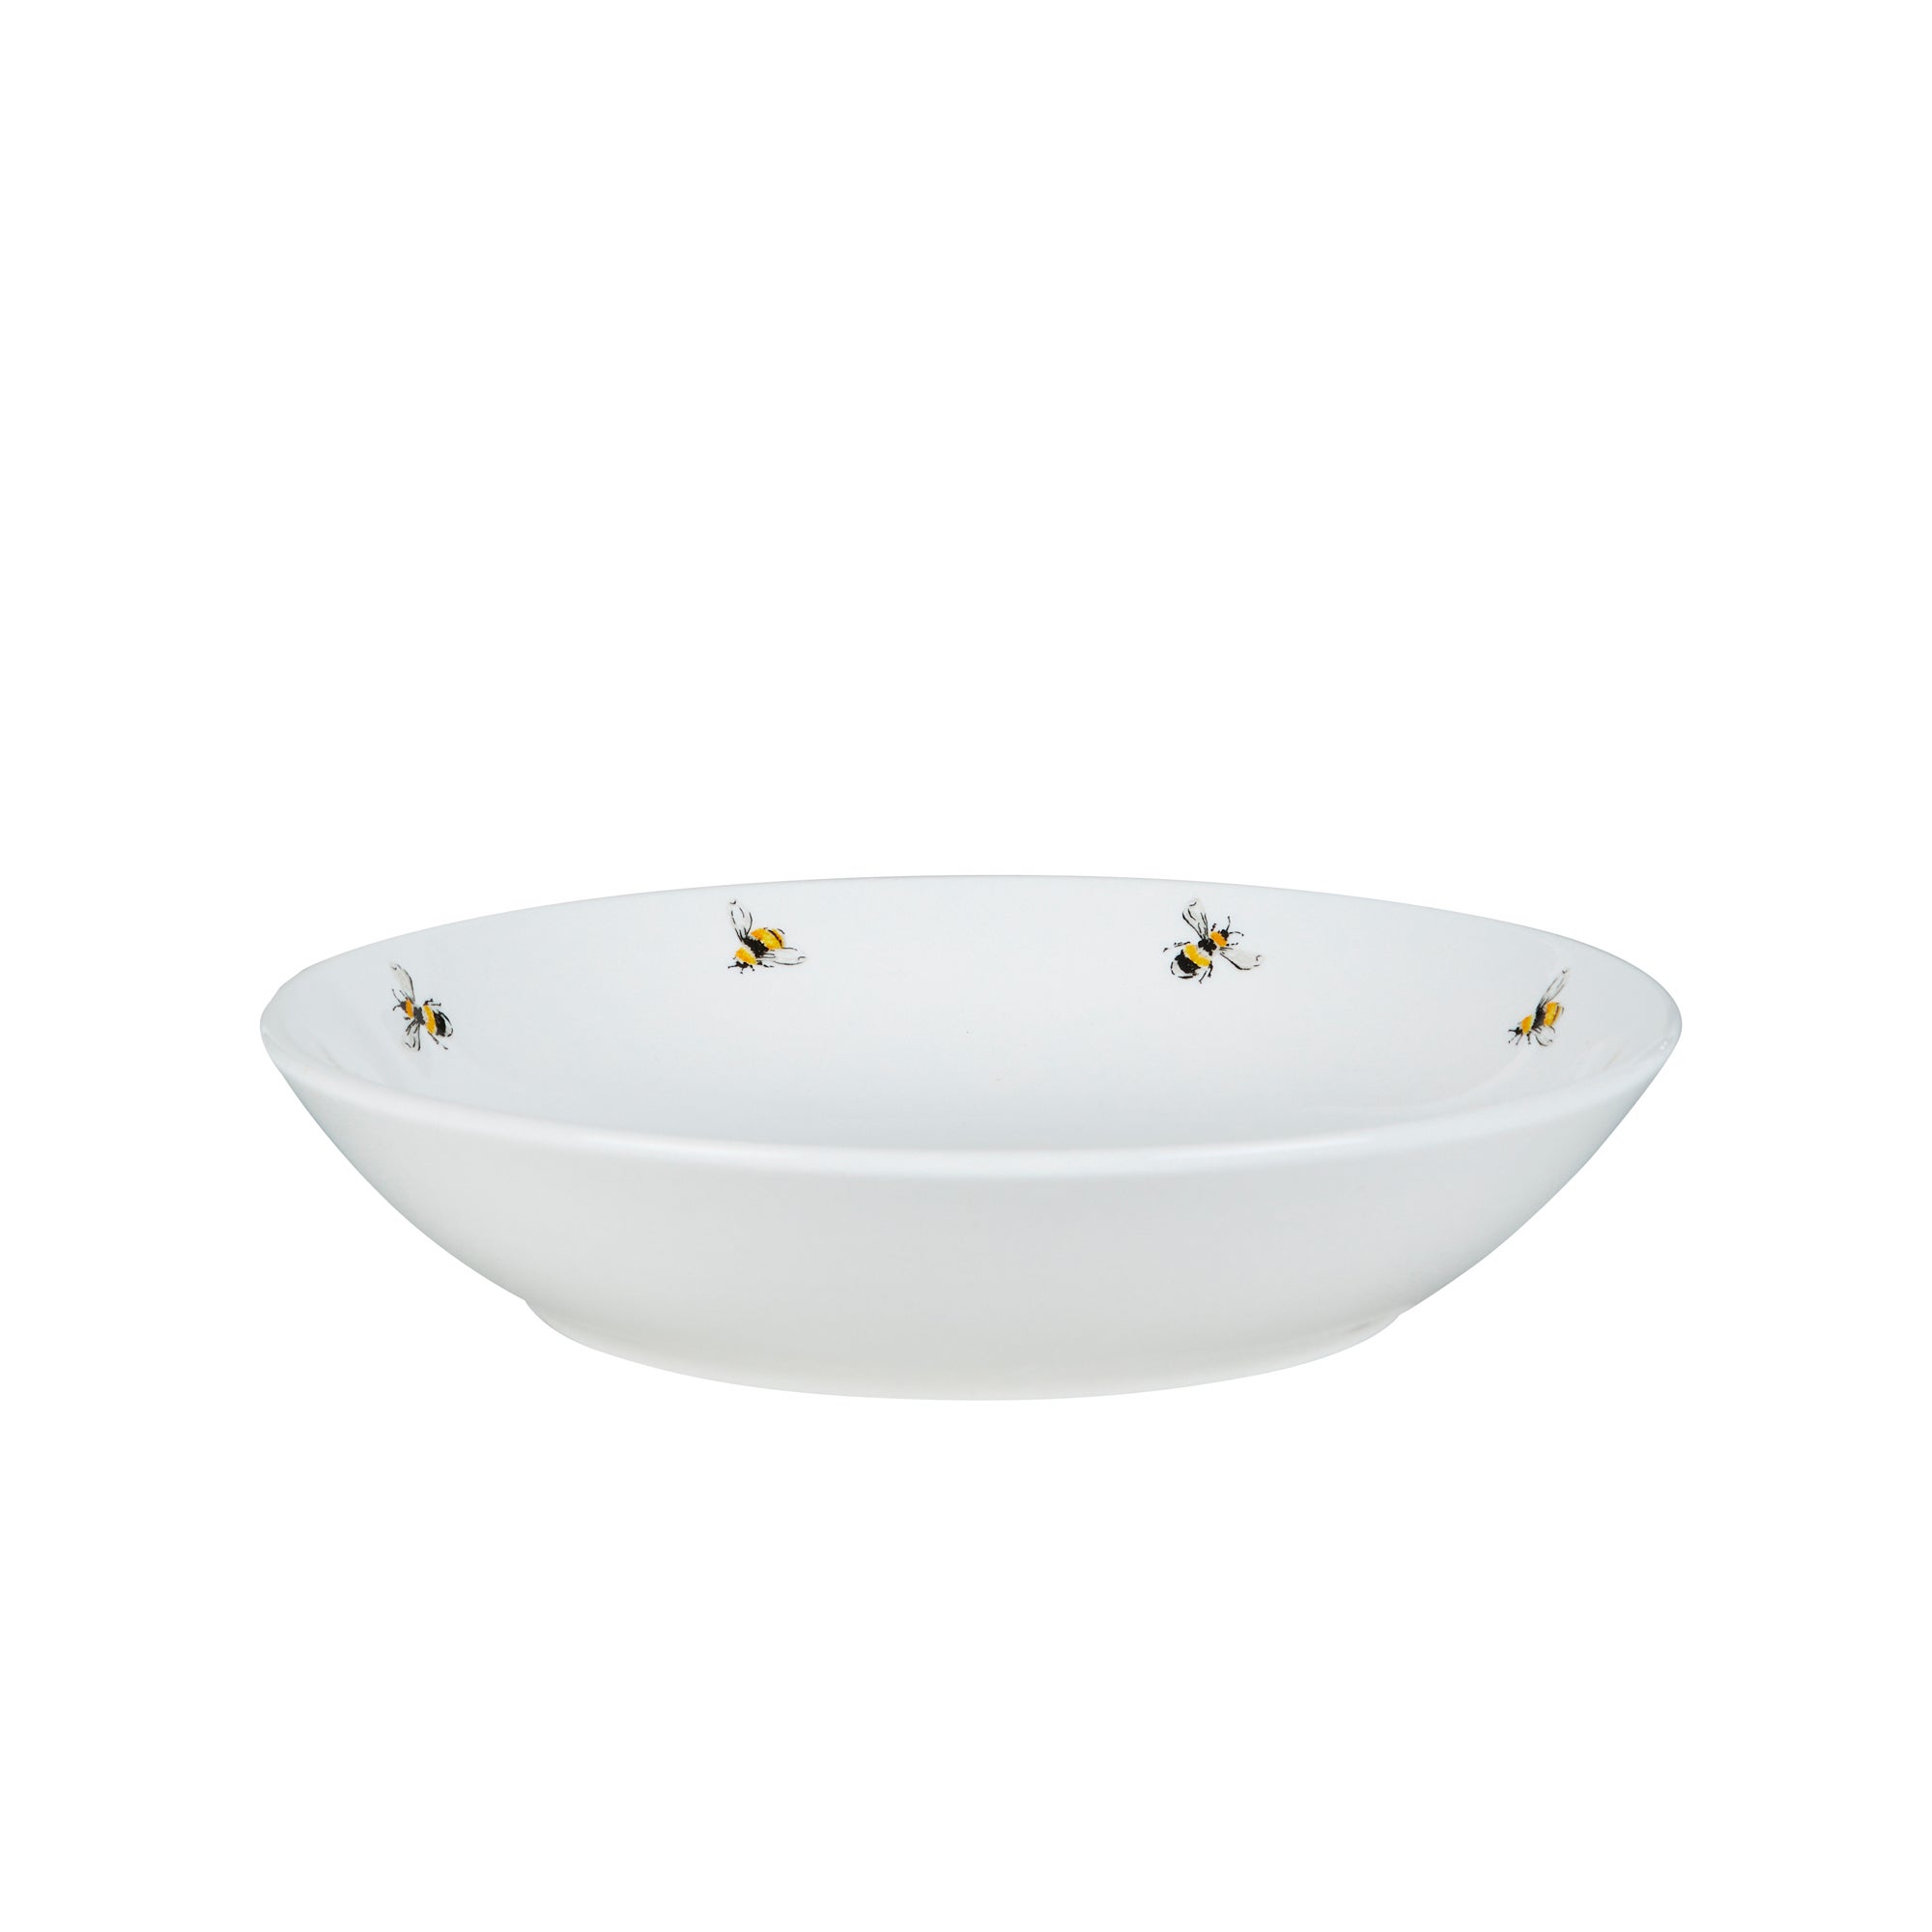 Bee Porcelain Pasta Bowl White Yellow And Black